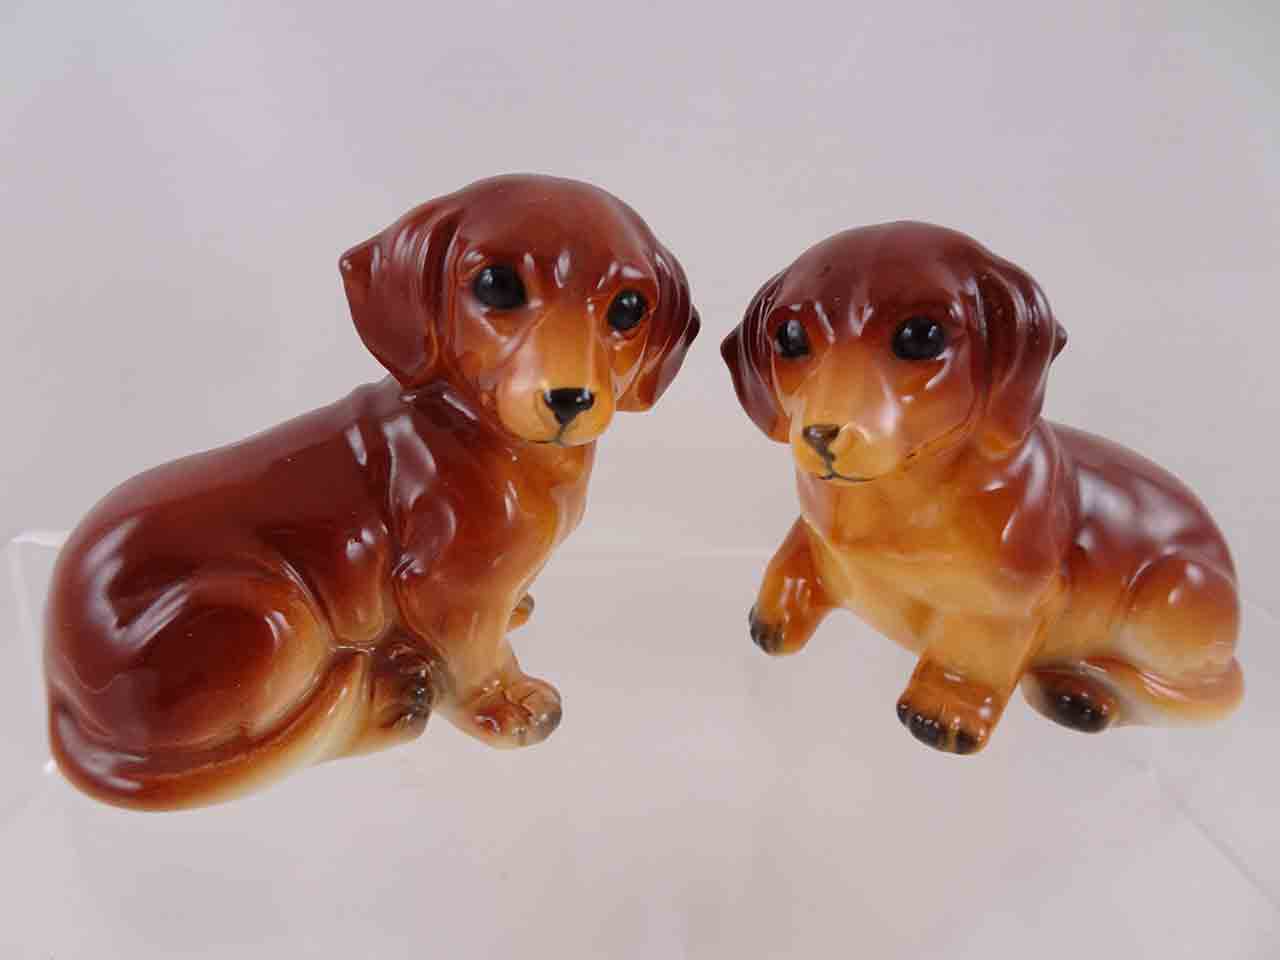 Napcoware Japan puppy dogs salt and pepper shakers - Dachshunds